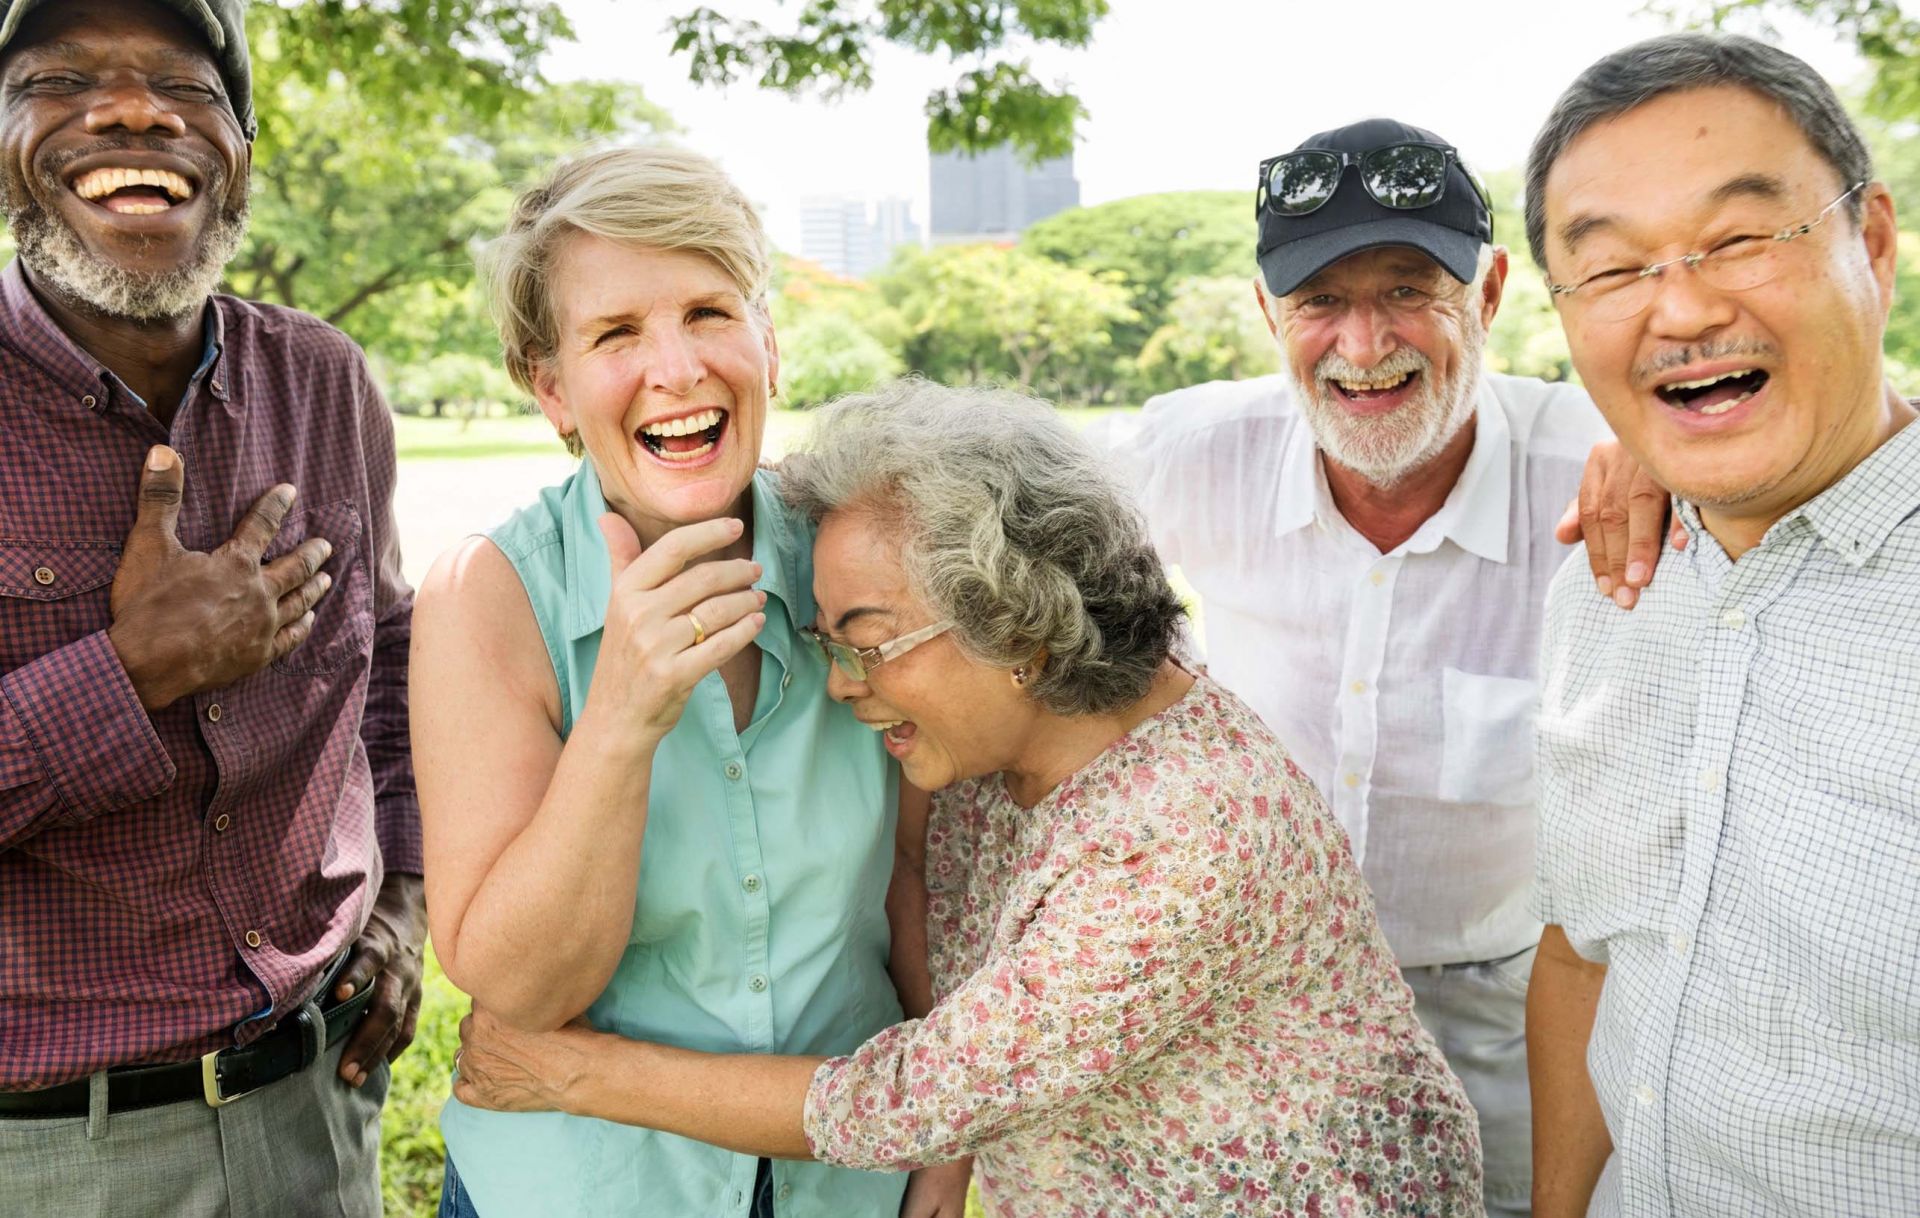 Laughing is good for seniors